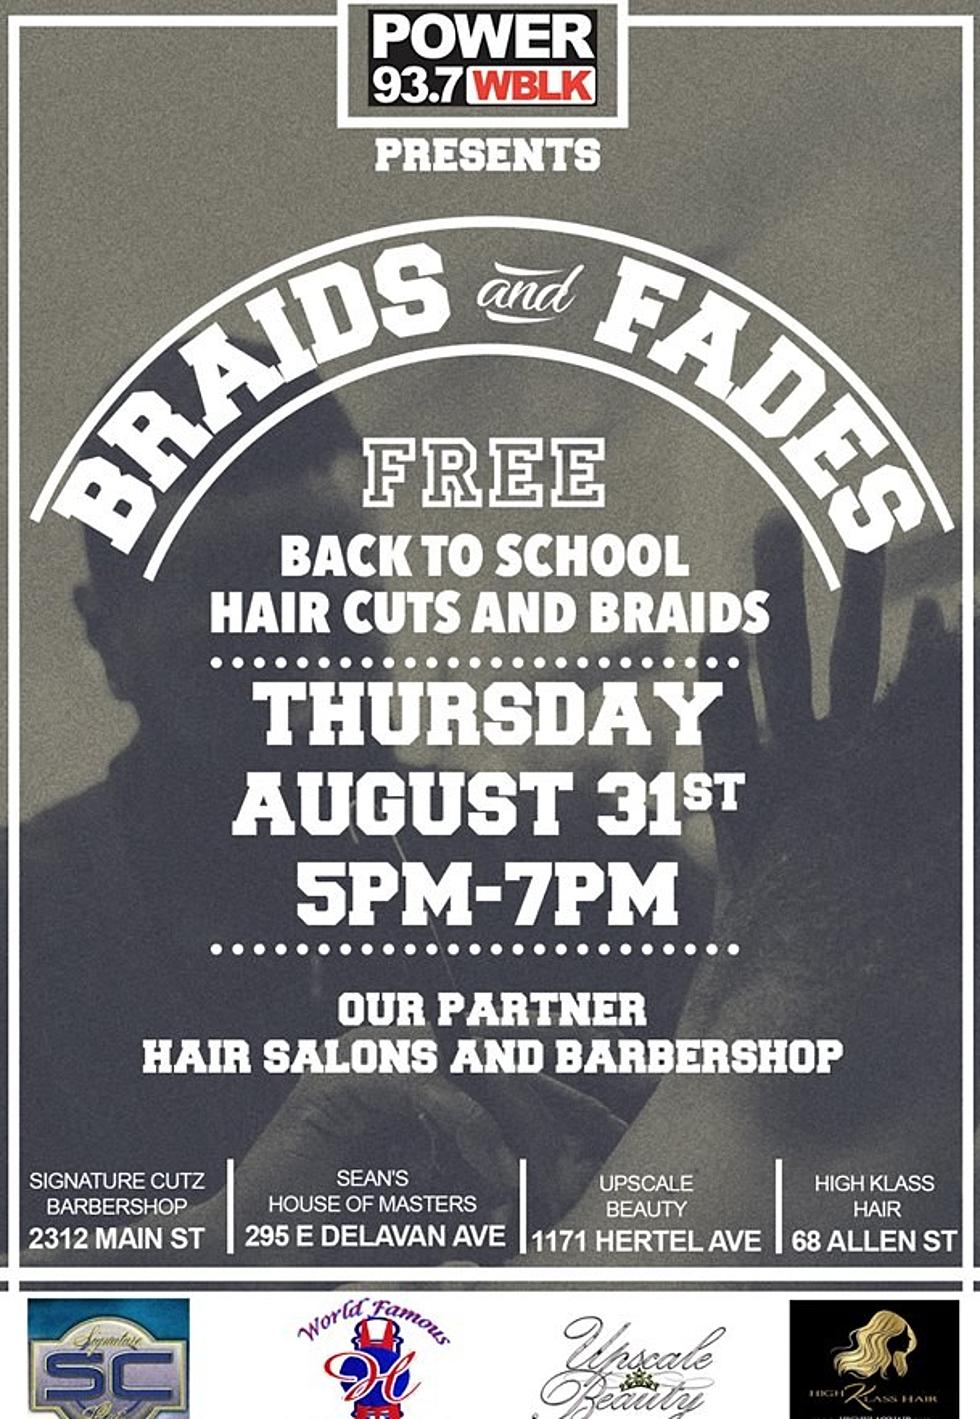 WBLK Presents Braids And Fades Back To School Free Haircuts And Braids